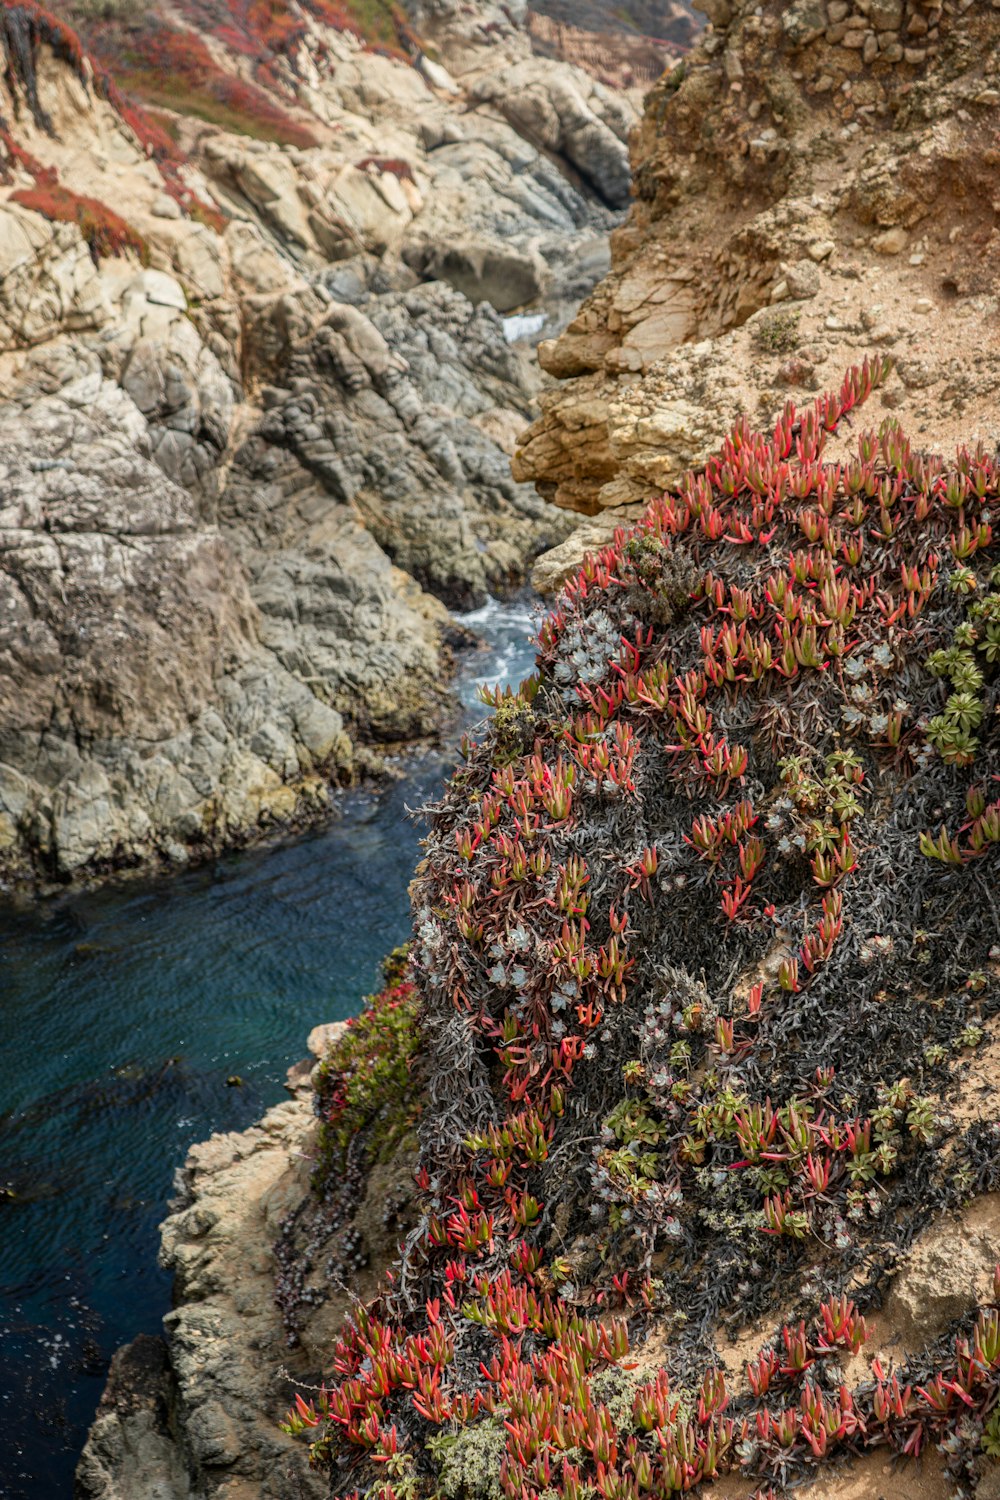 a body of water surrounded by rocks and plants